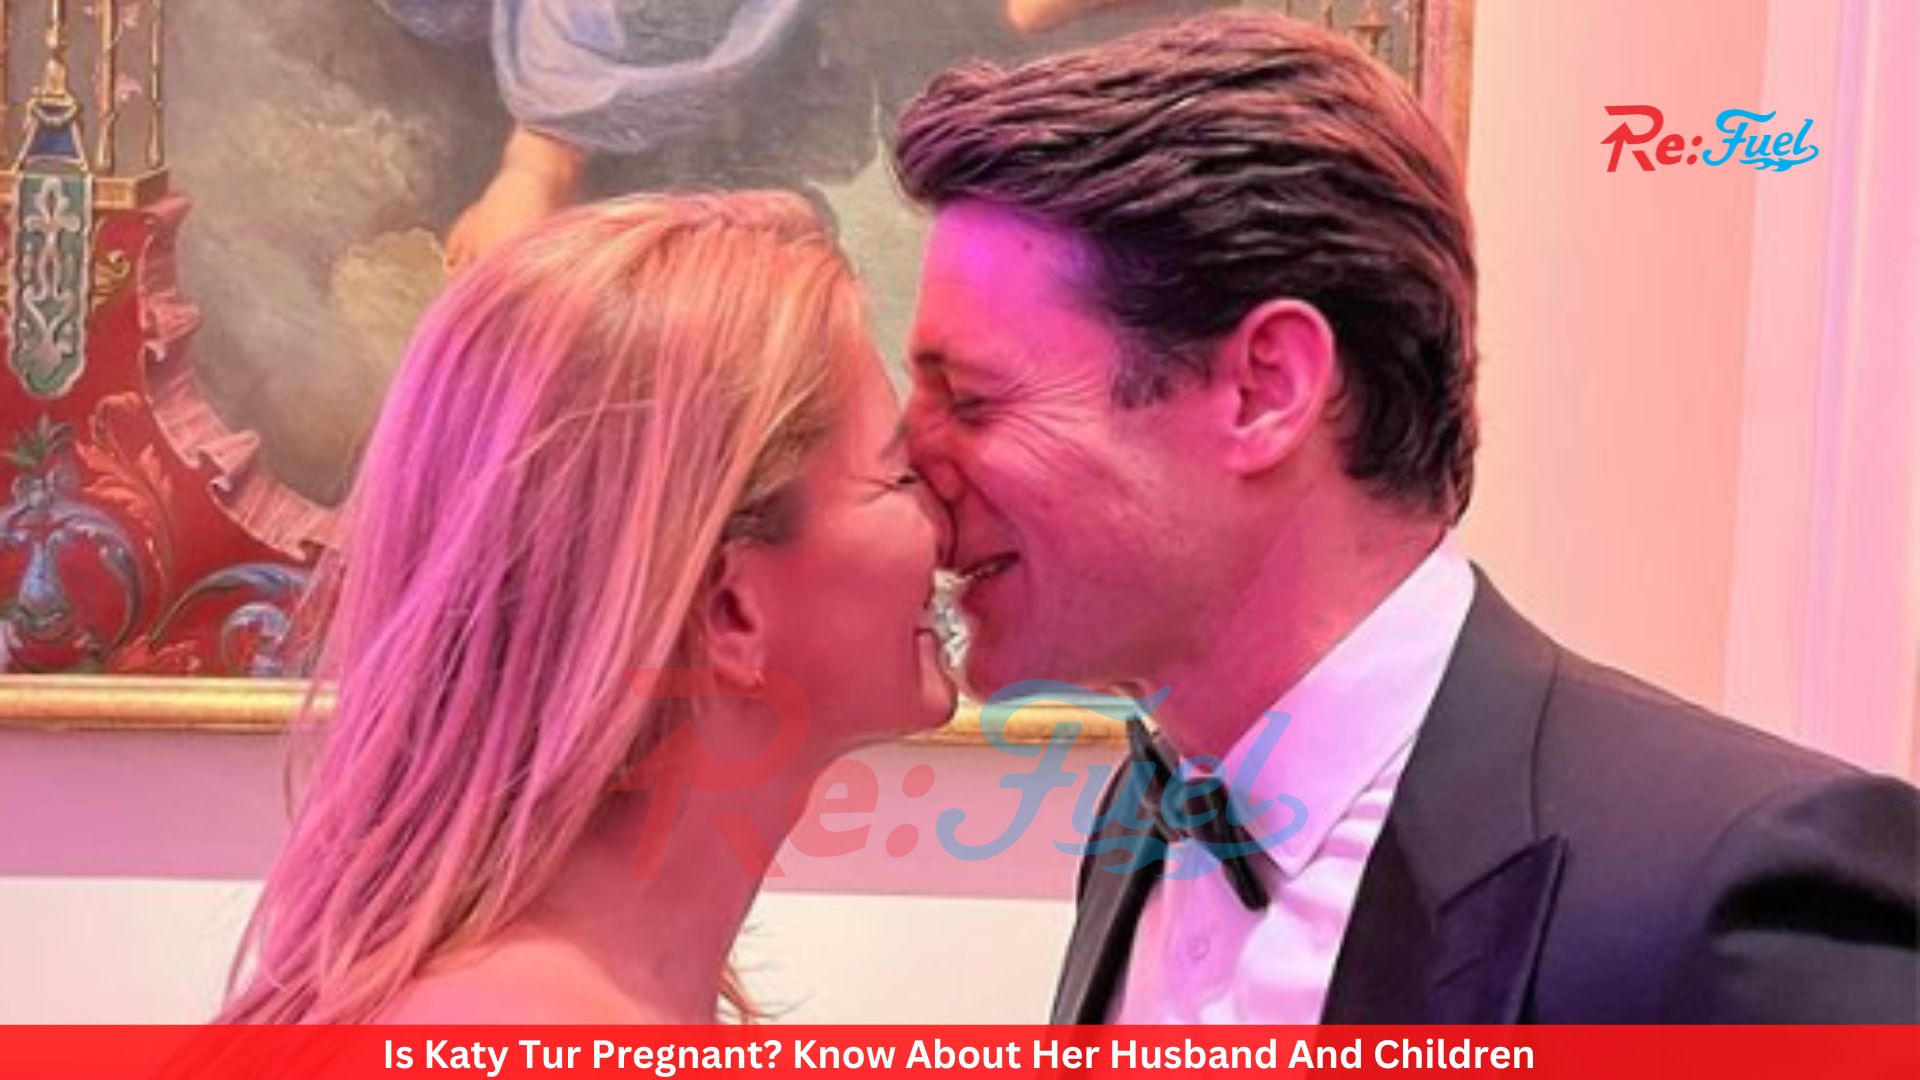 Is Katy Tur Pregnant? Know About Her Husband And Children